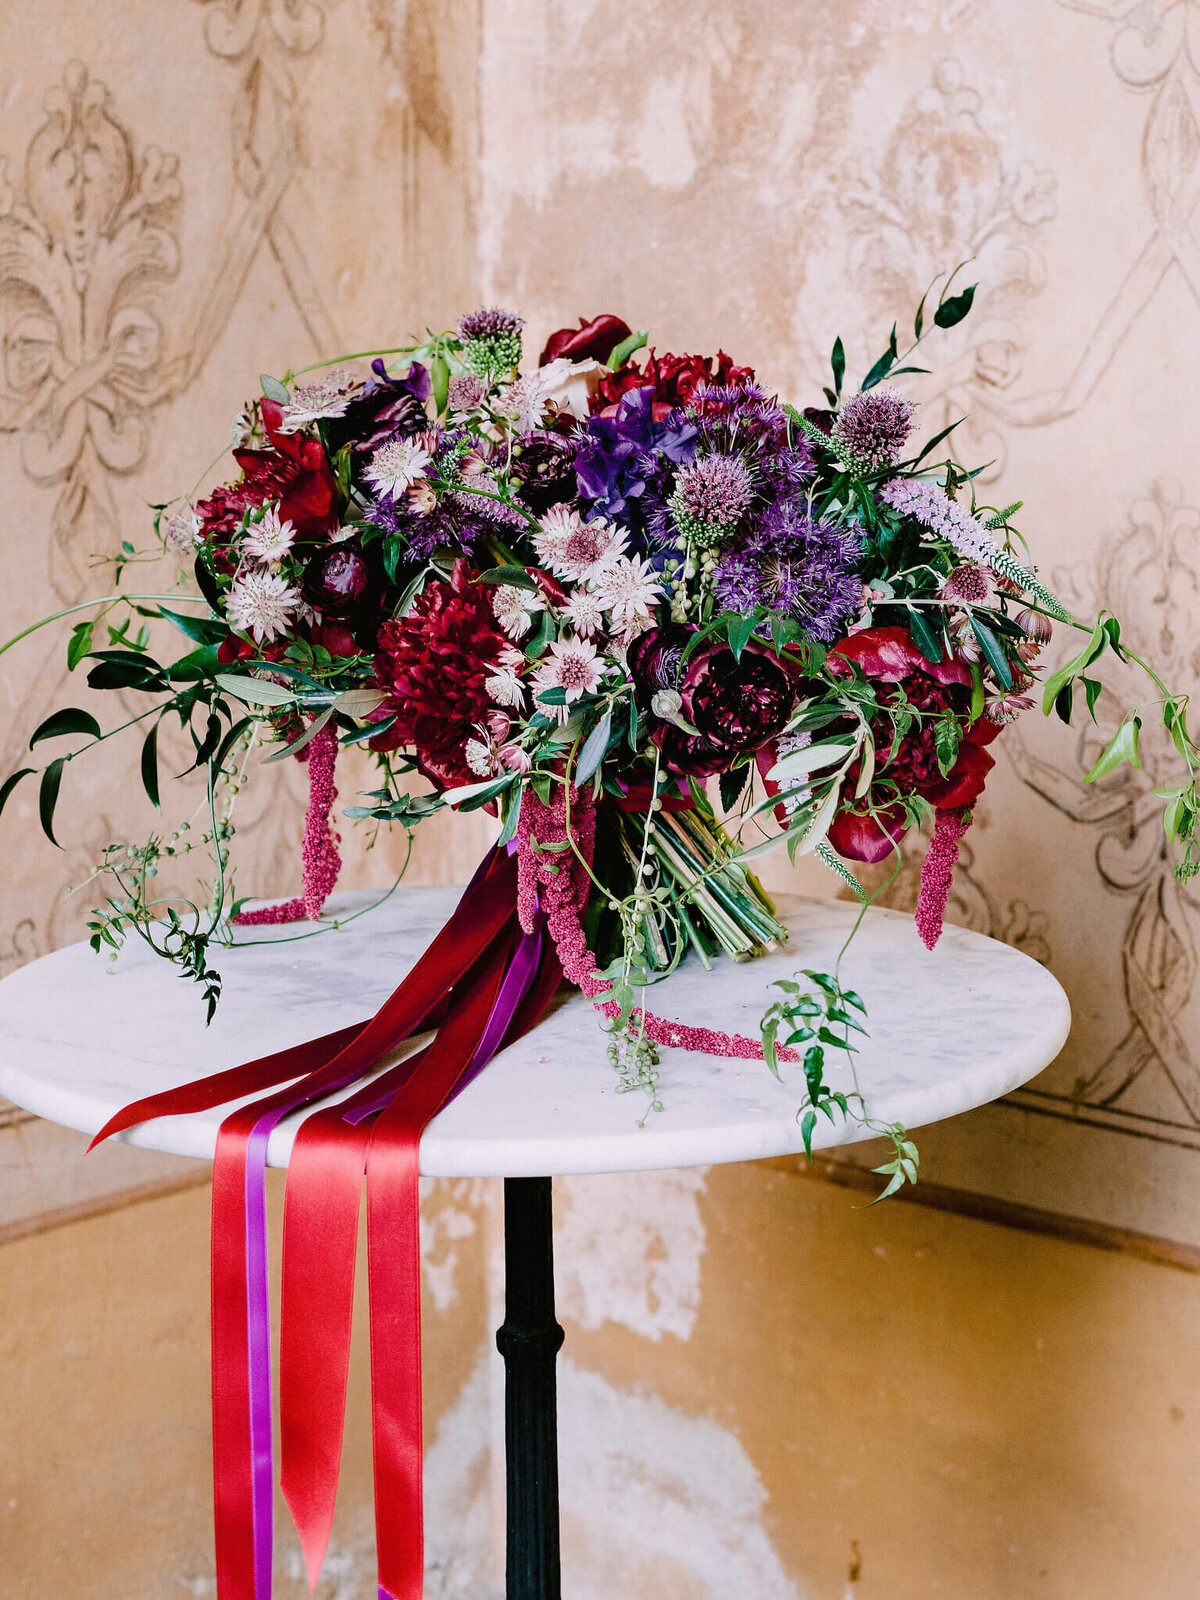 Big flower bouquet of red, blue, white, pink and purple colors on a table, with red and purple laces flowing down the table